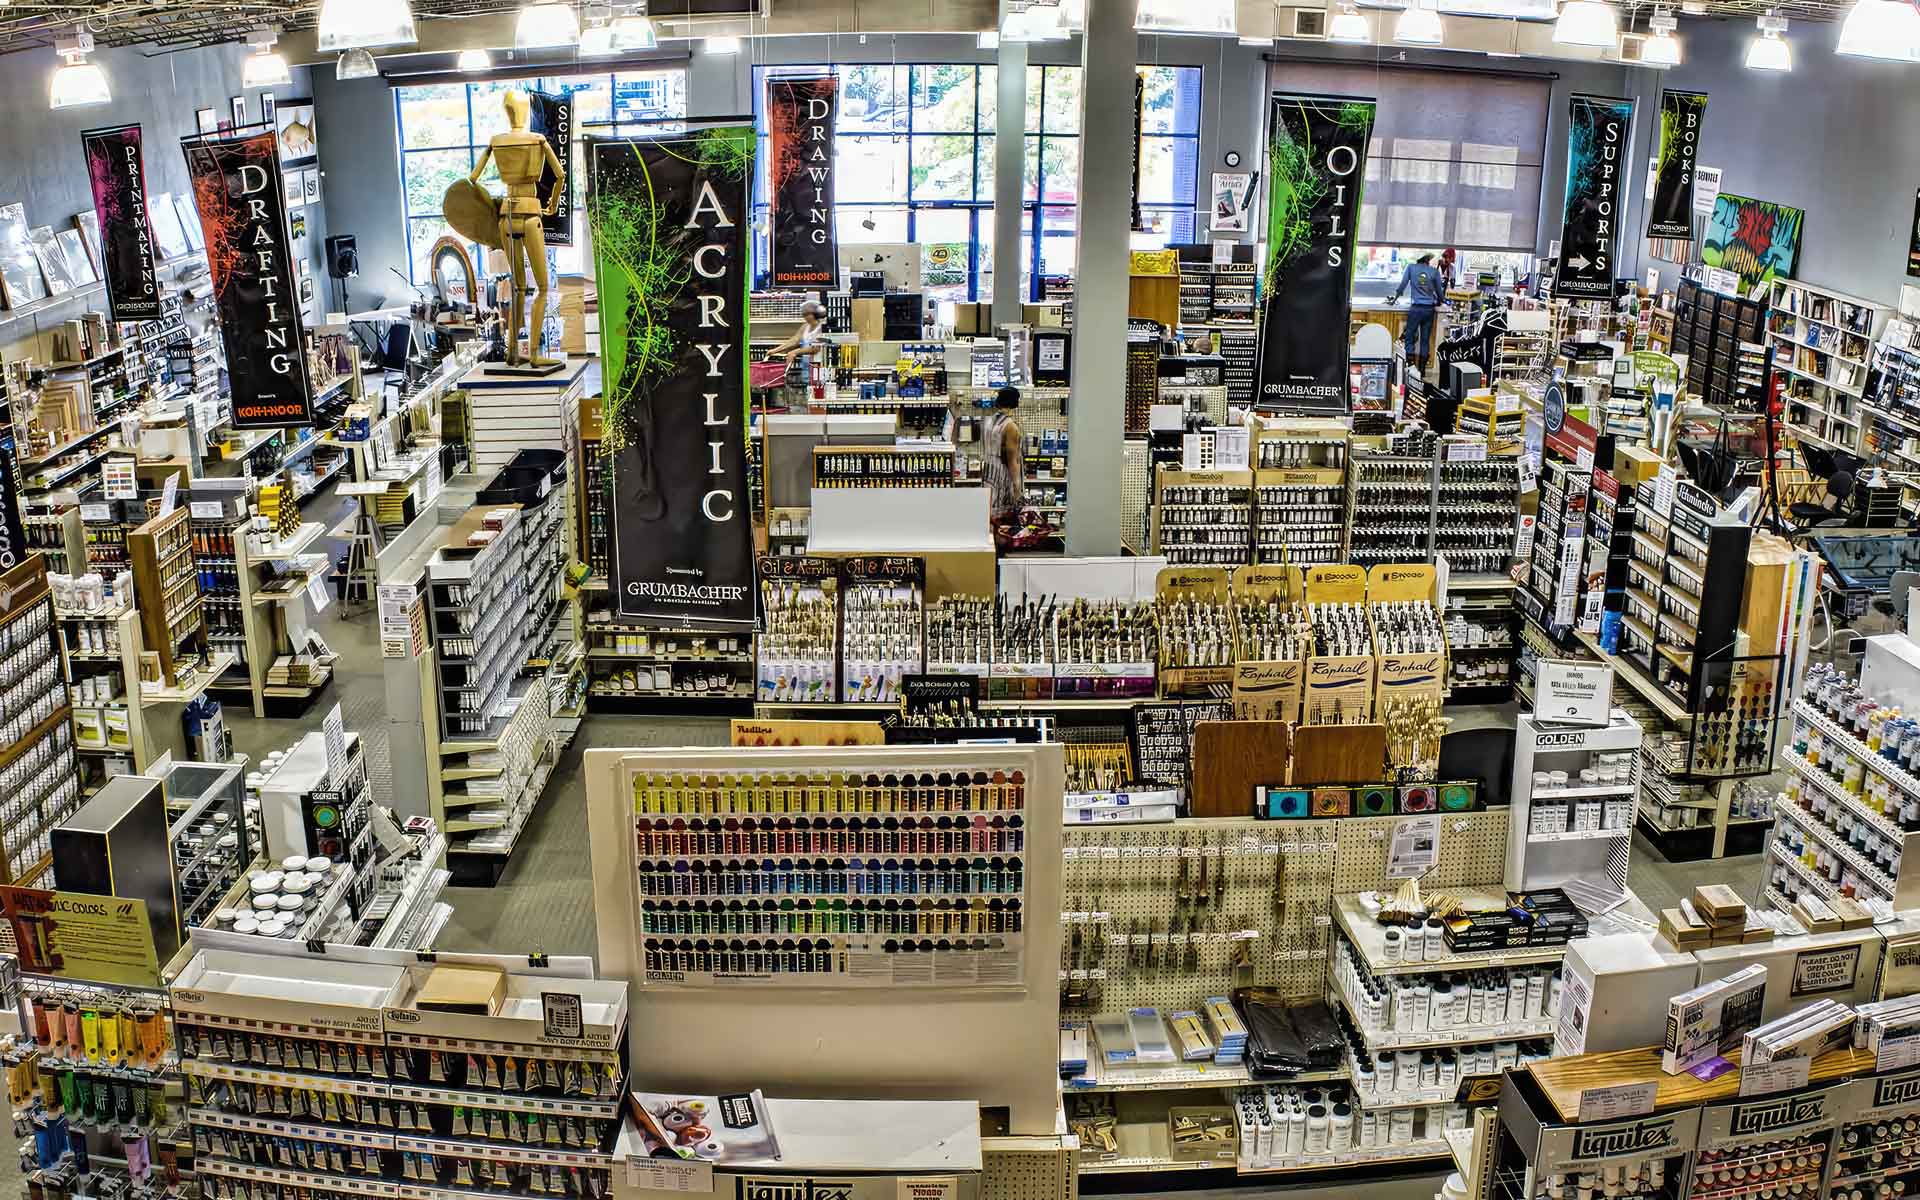 The Art Store/Commercial Art Supply - The Art Store/Commercial Art Supply